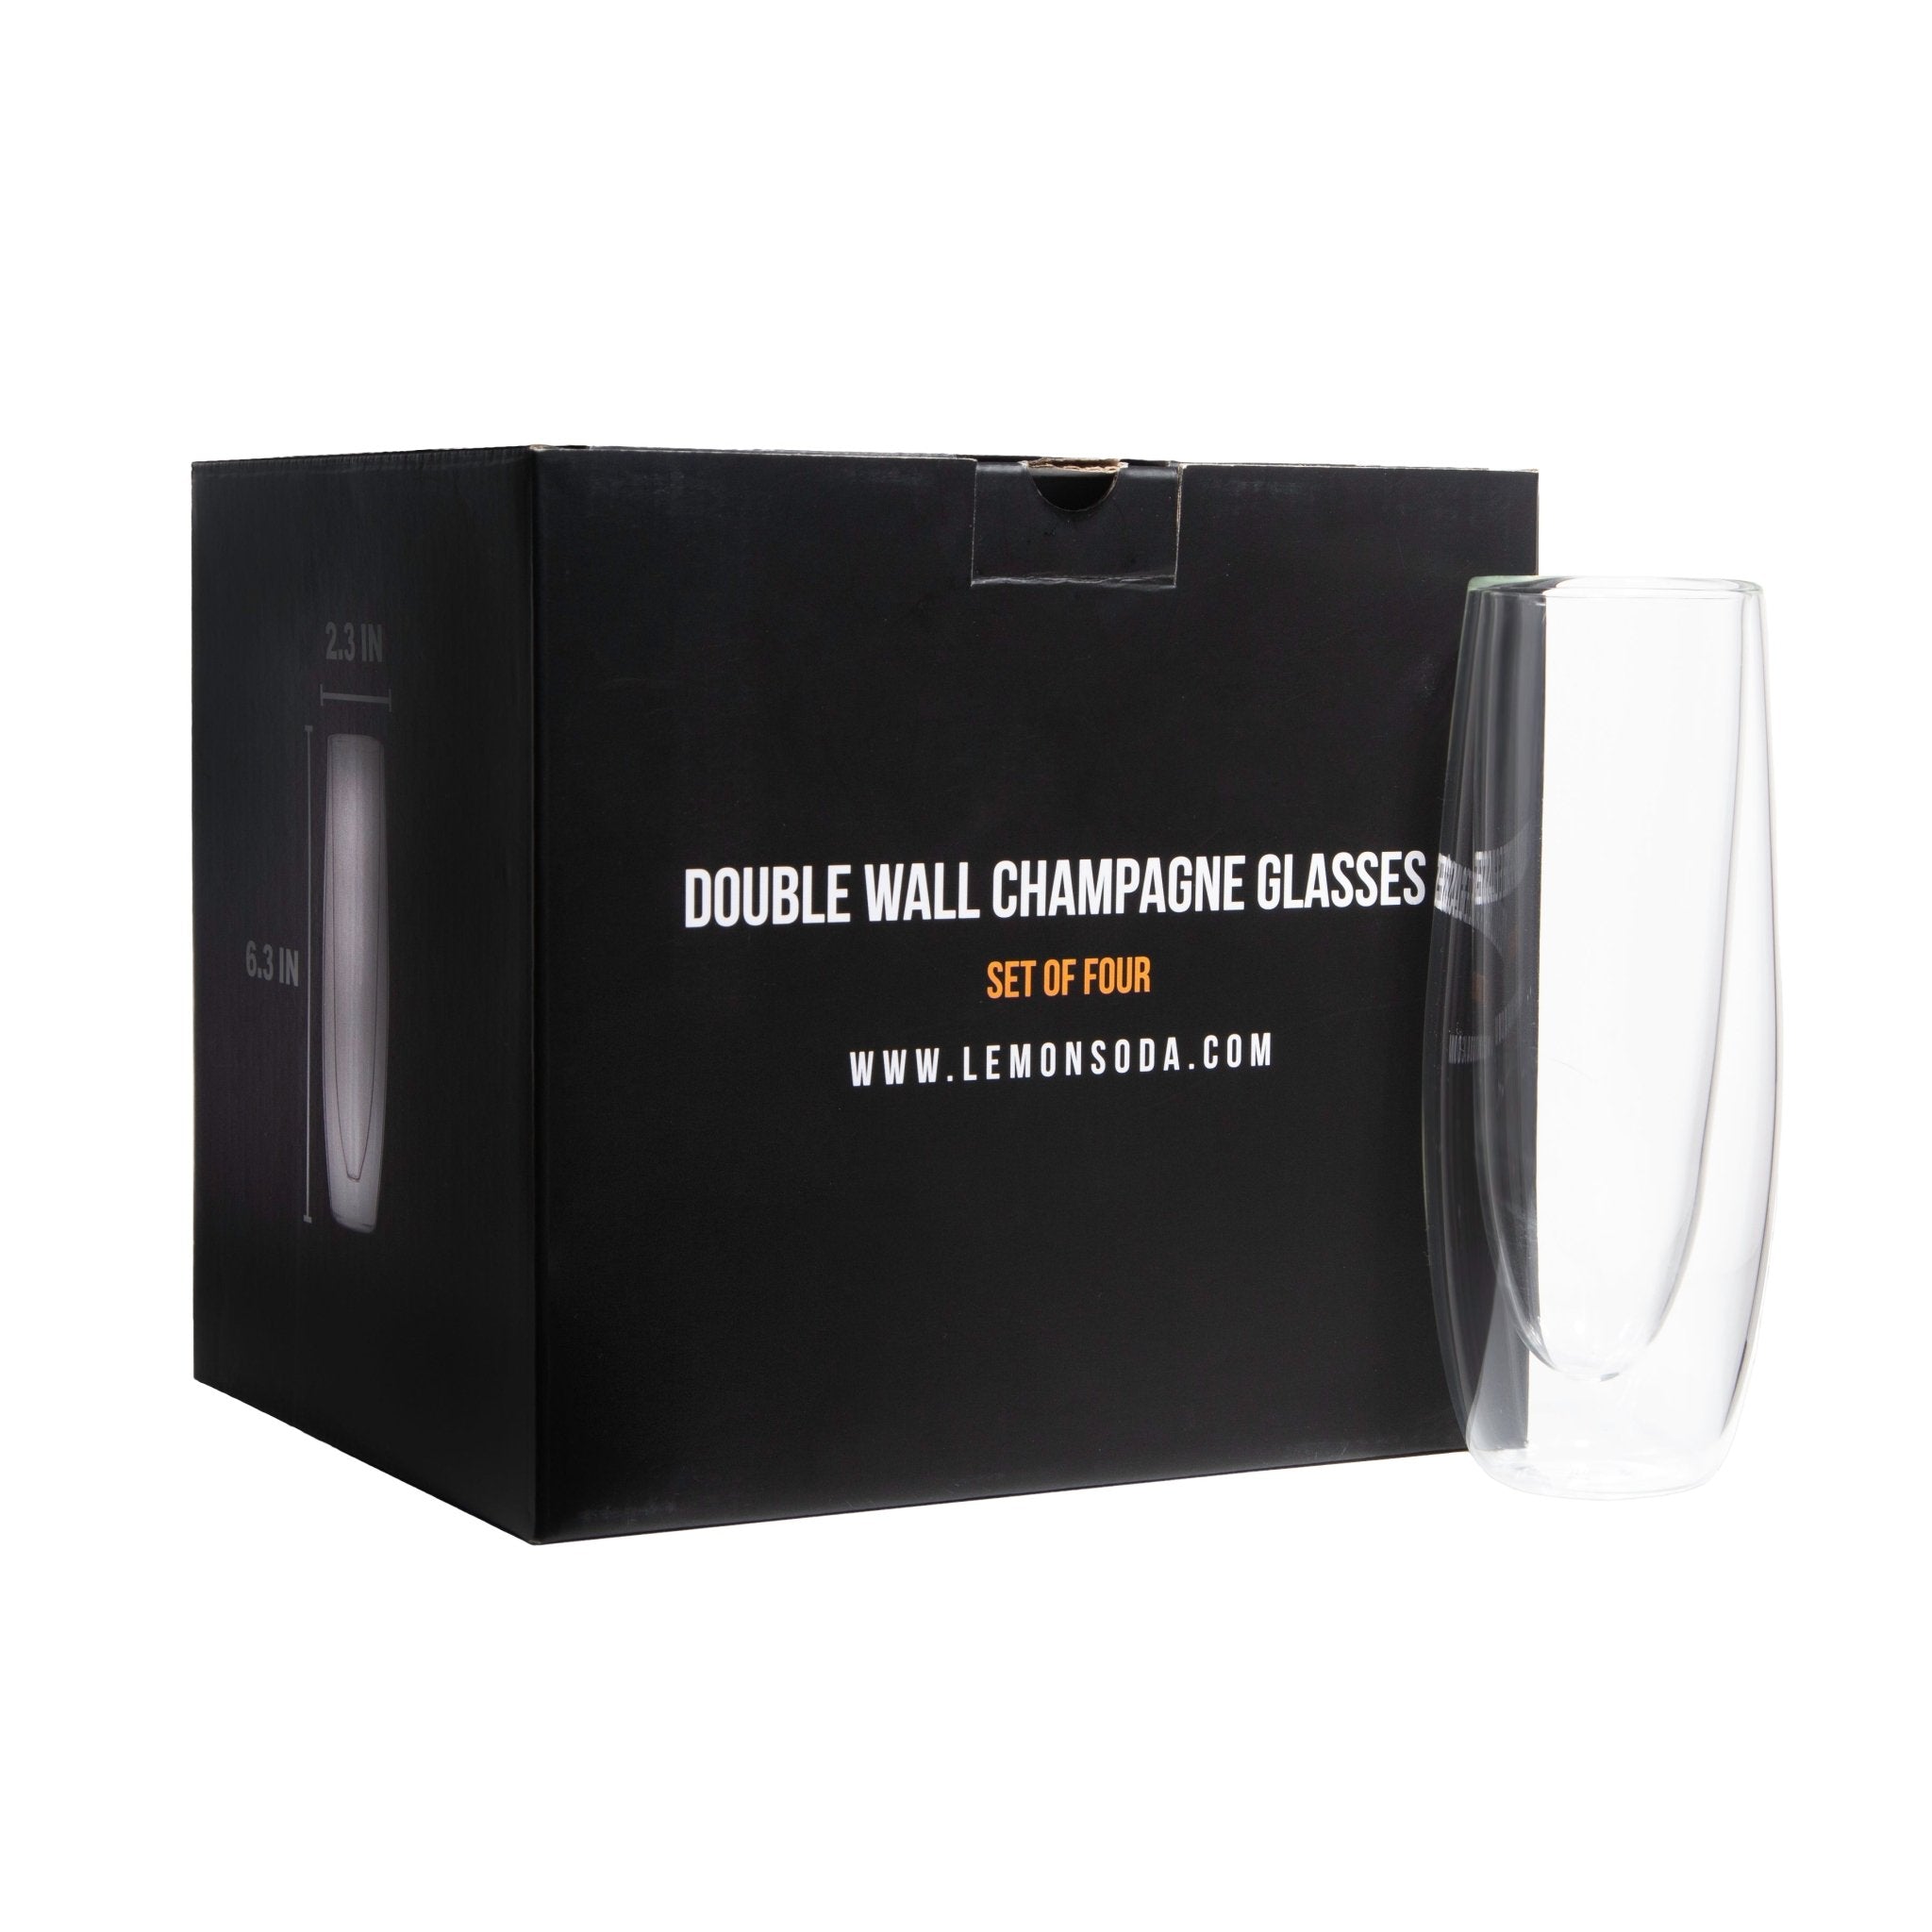 Double Wall Champagne Glasses Set